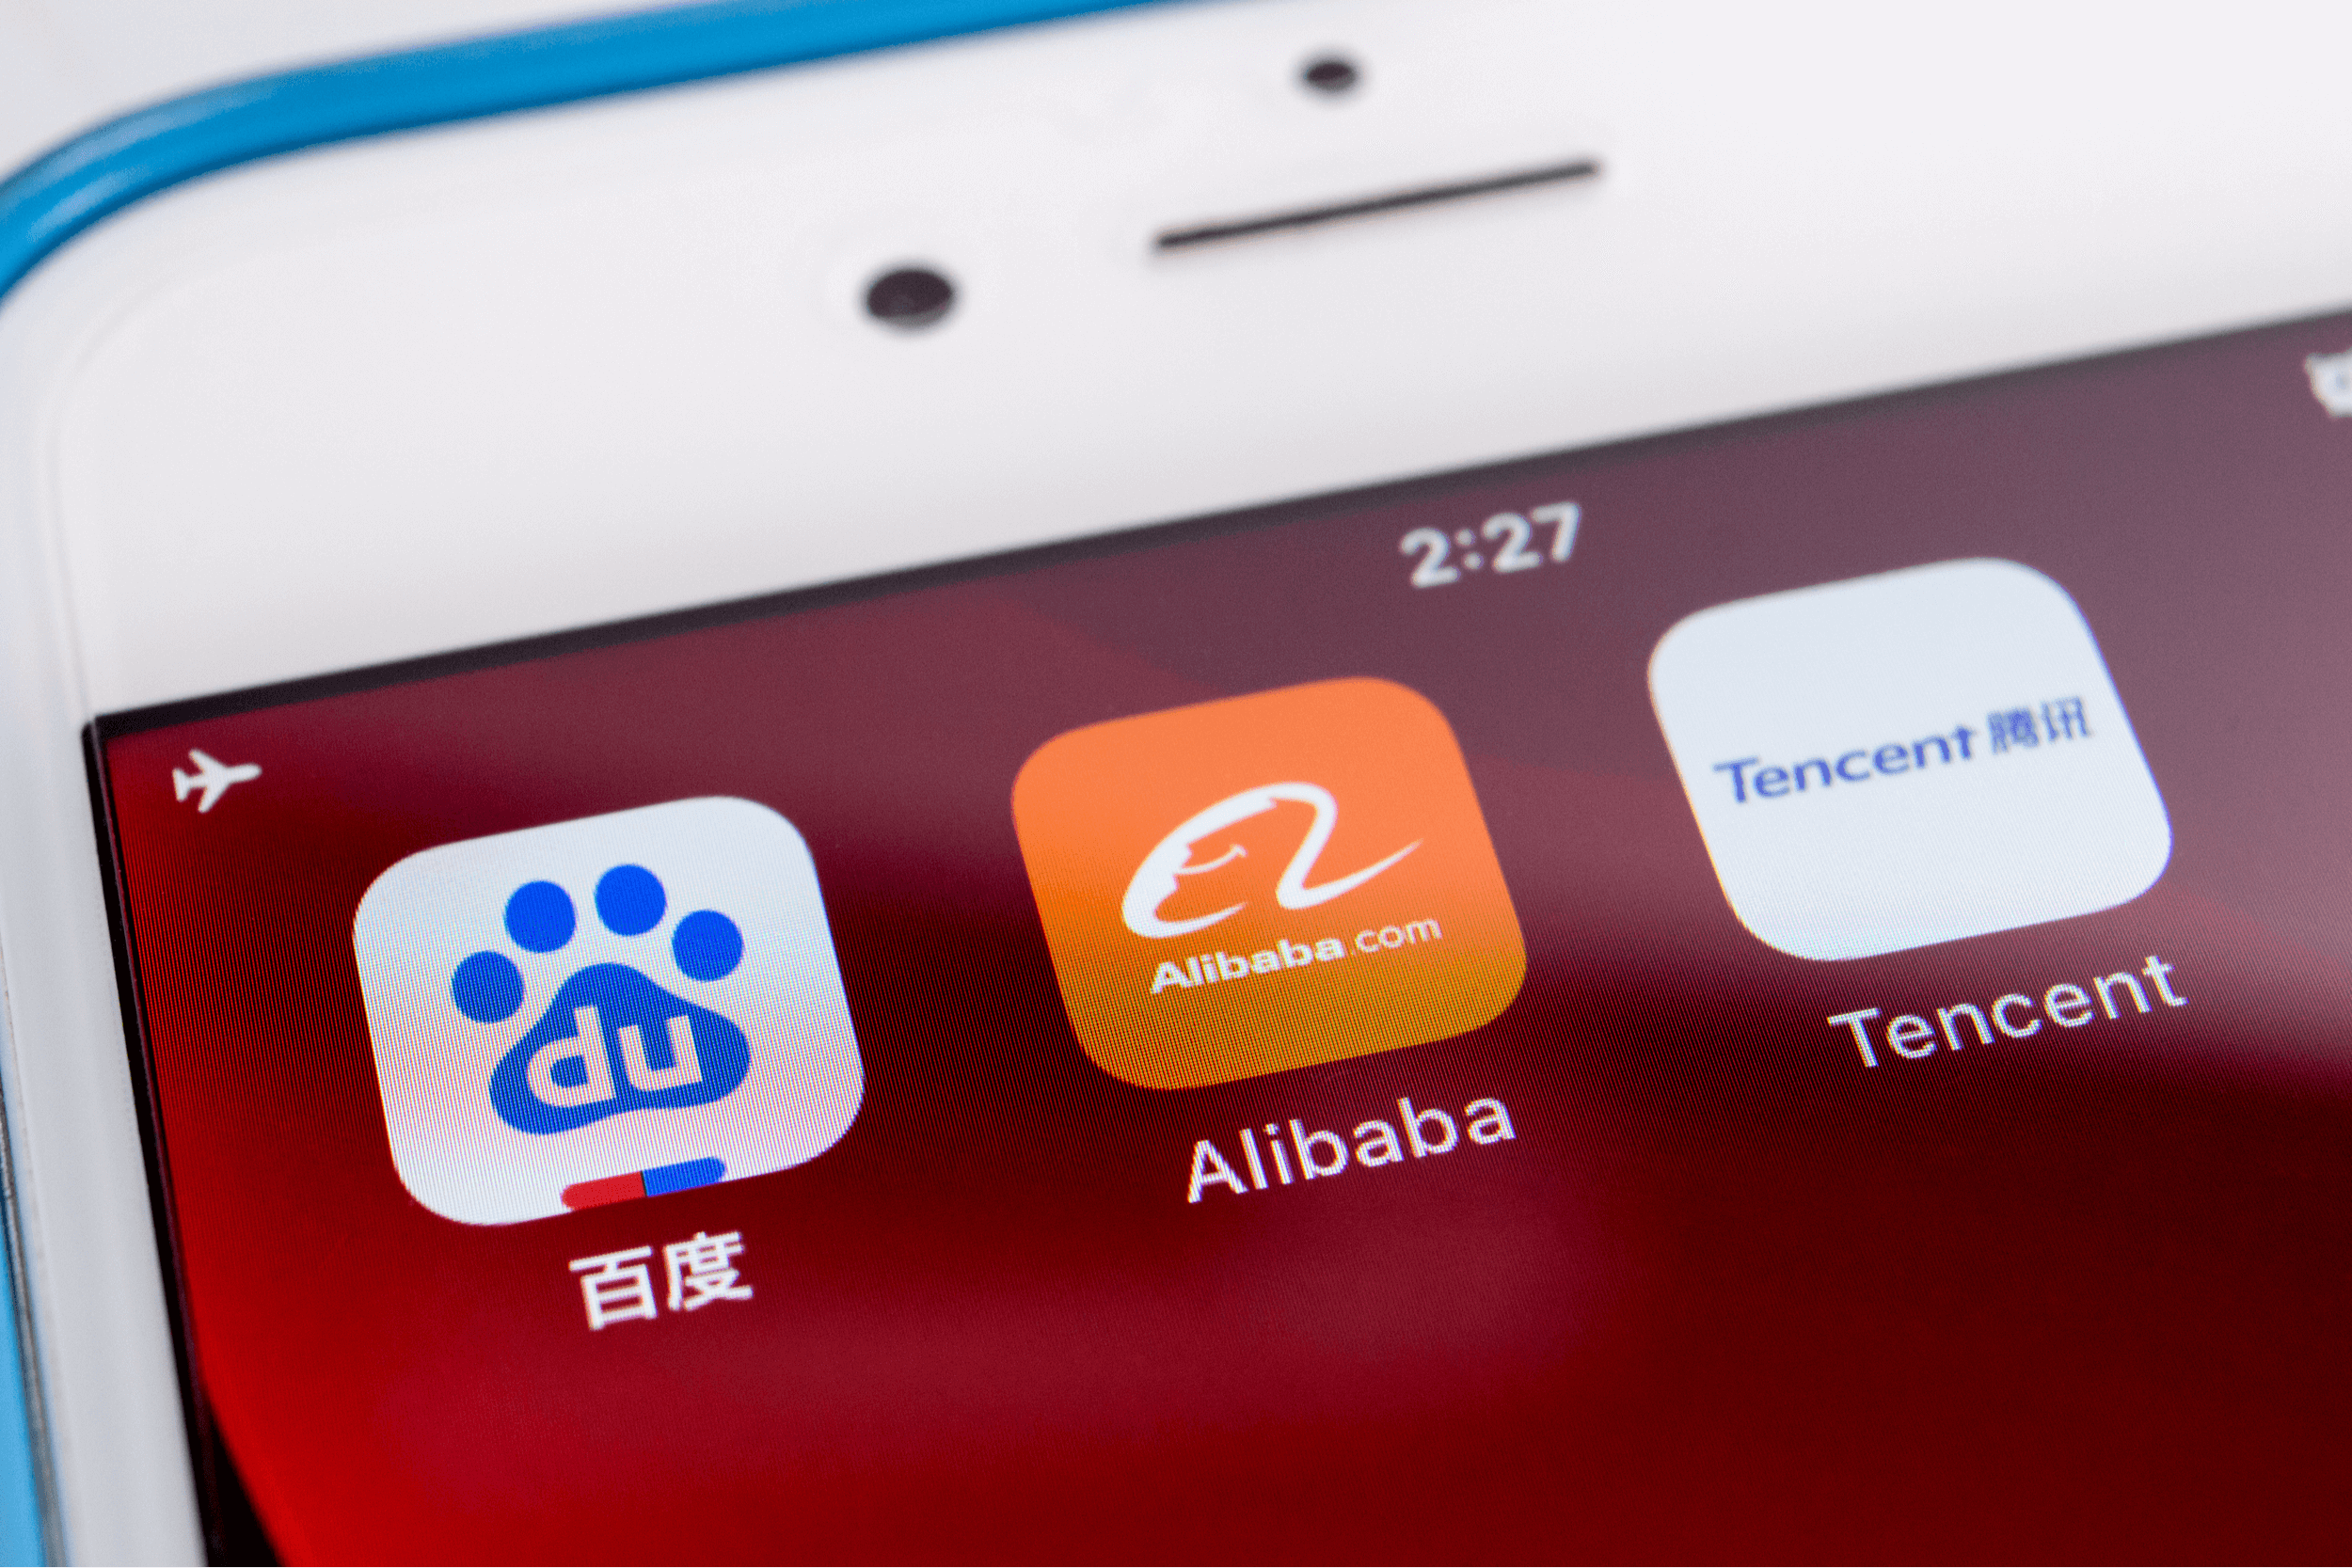 China’s biggest tech giants, on an iPhone. Baidu, Alibaba & Tencent are the 3 Chinese top tech companies that dominated IT industry in China.